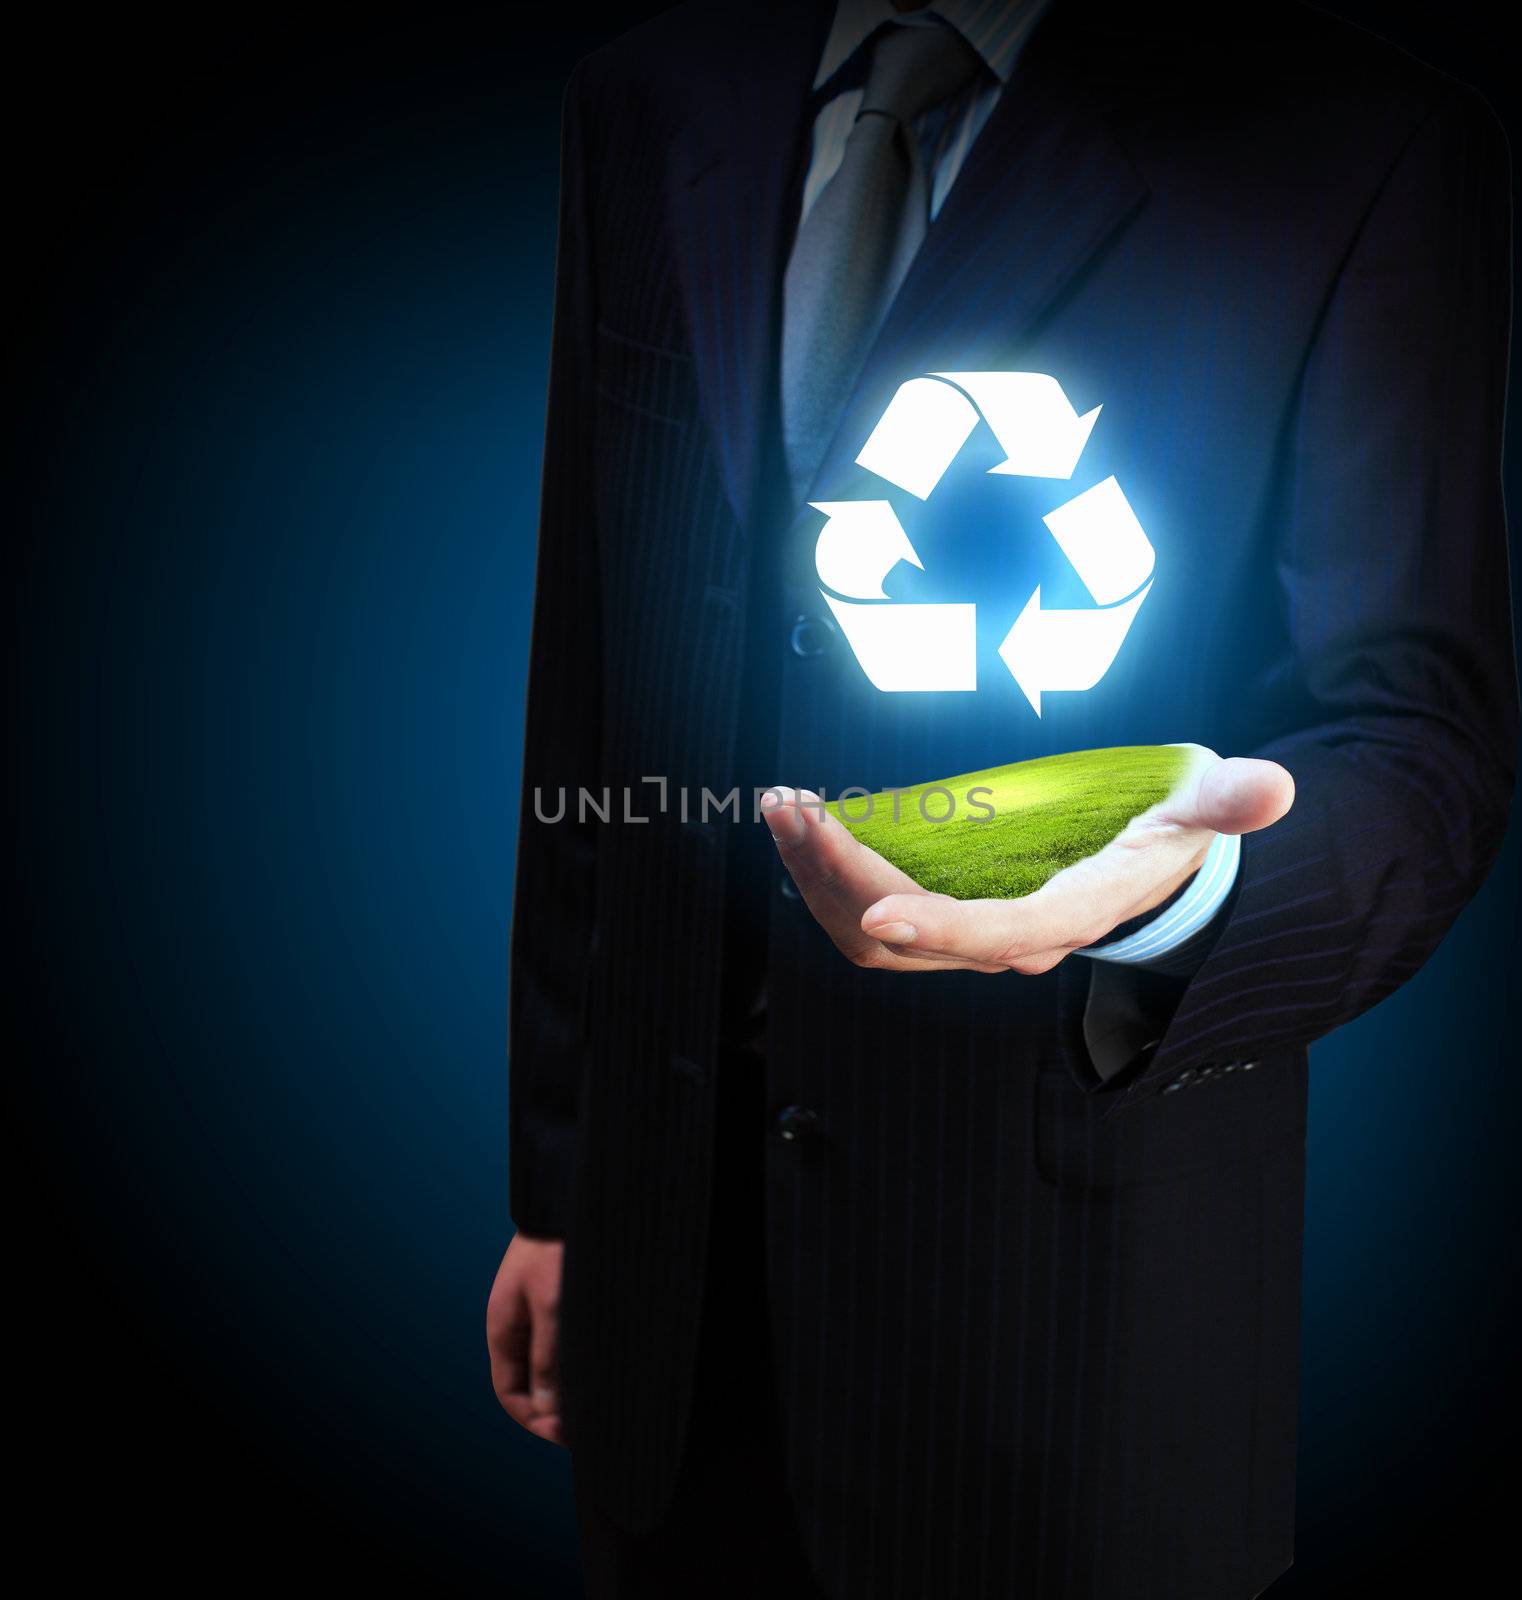 Reuse, reduce, recycle poster design. Include reuse symbol image